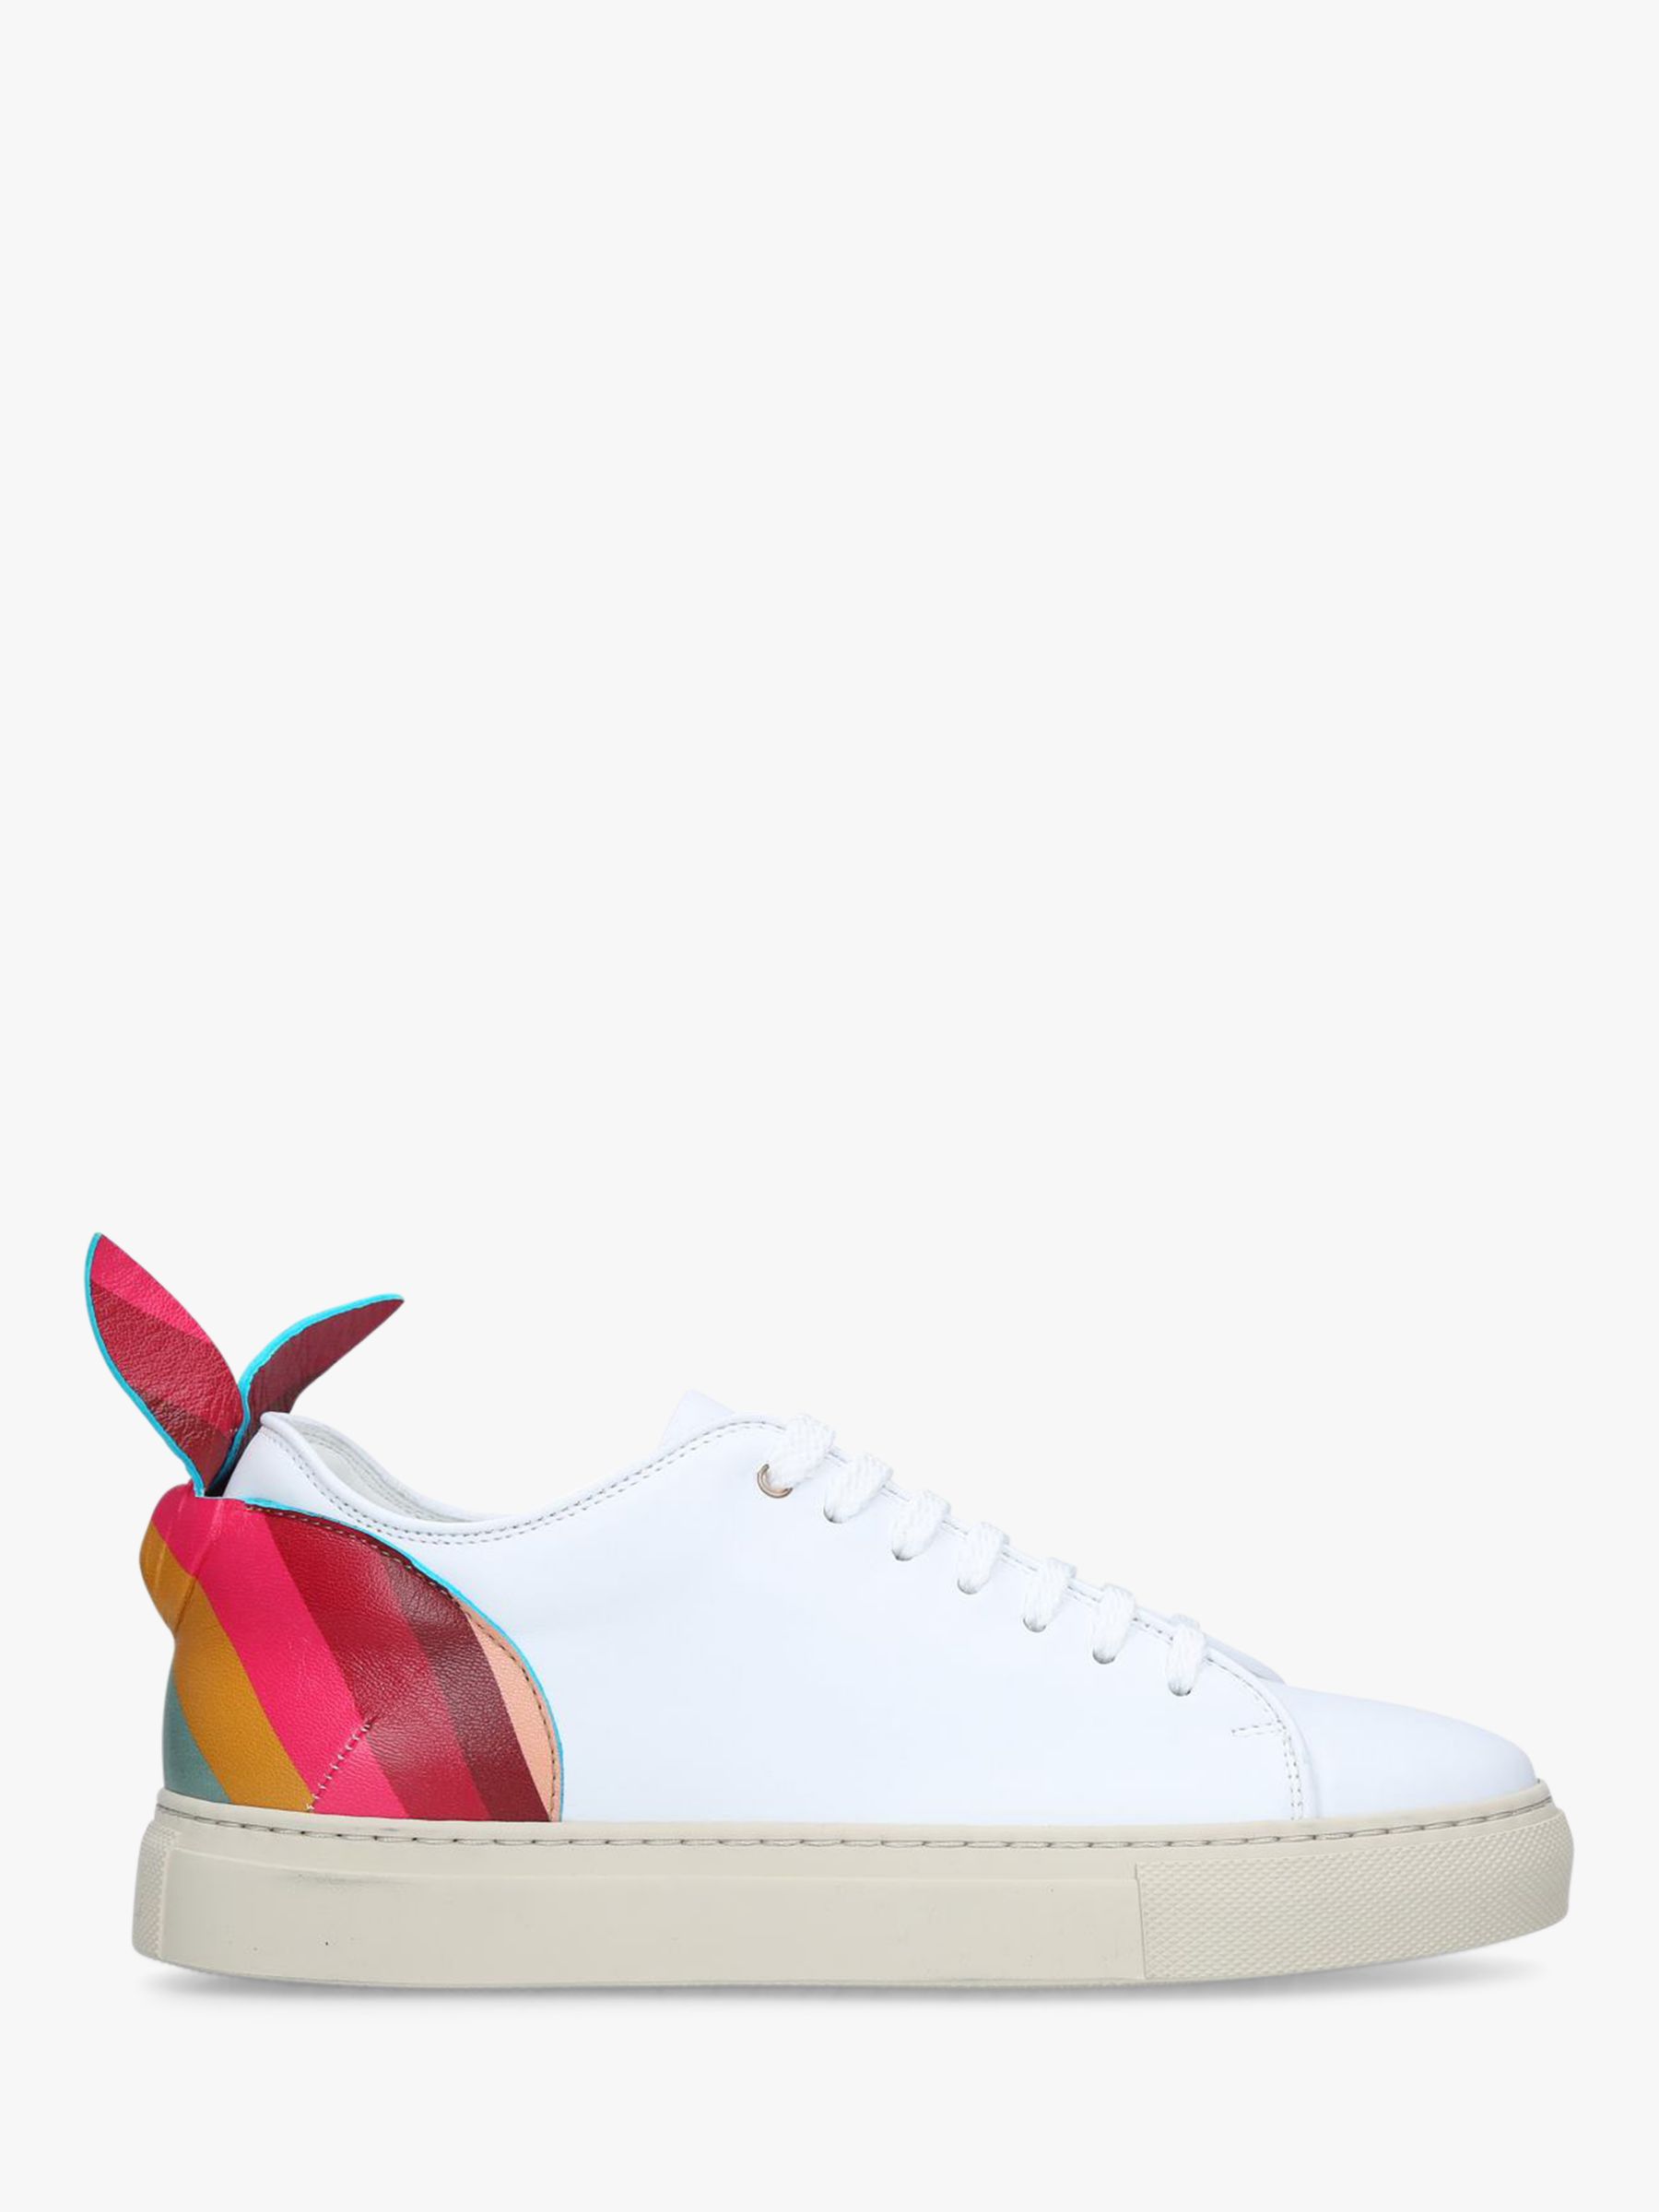 Paul Smith Basso Bunny Lace Up Trainers 